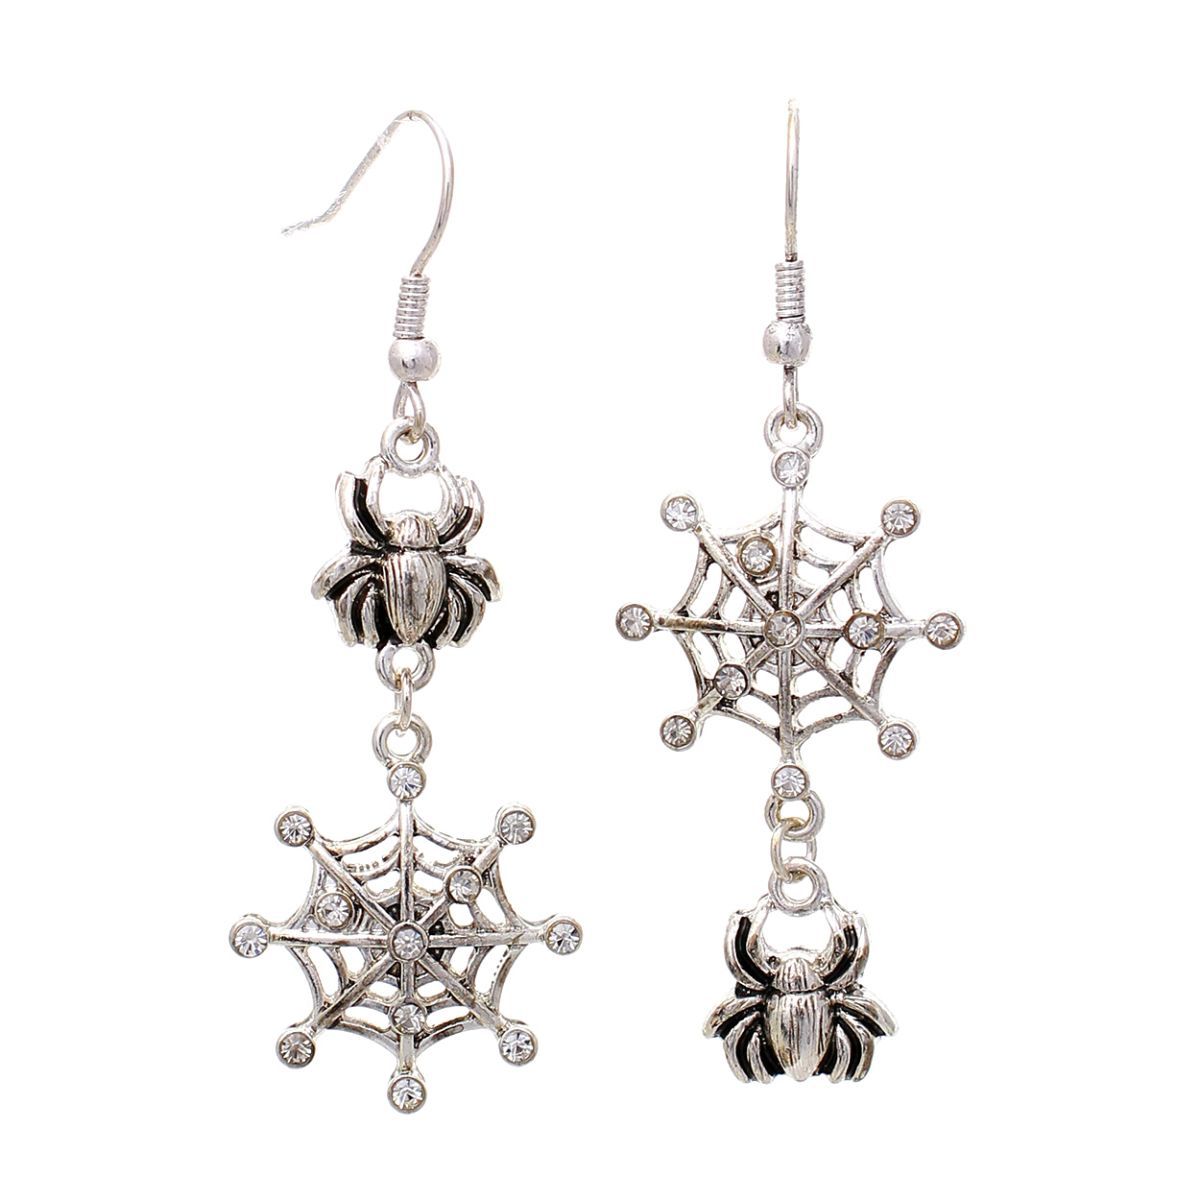 Silver Spider and Web Earrings